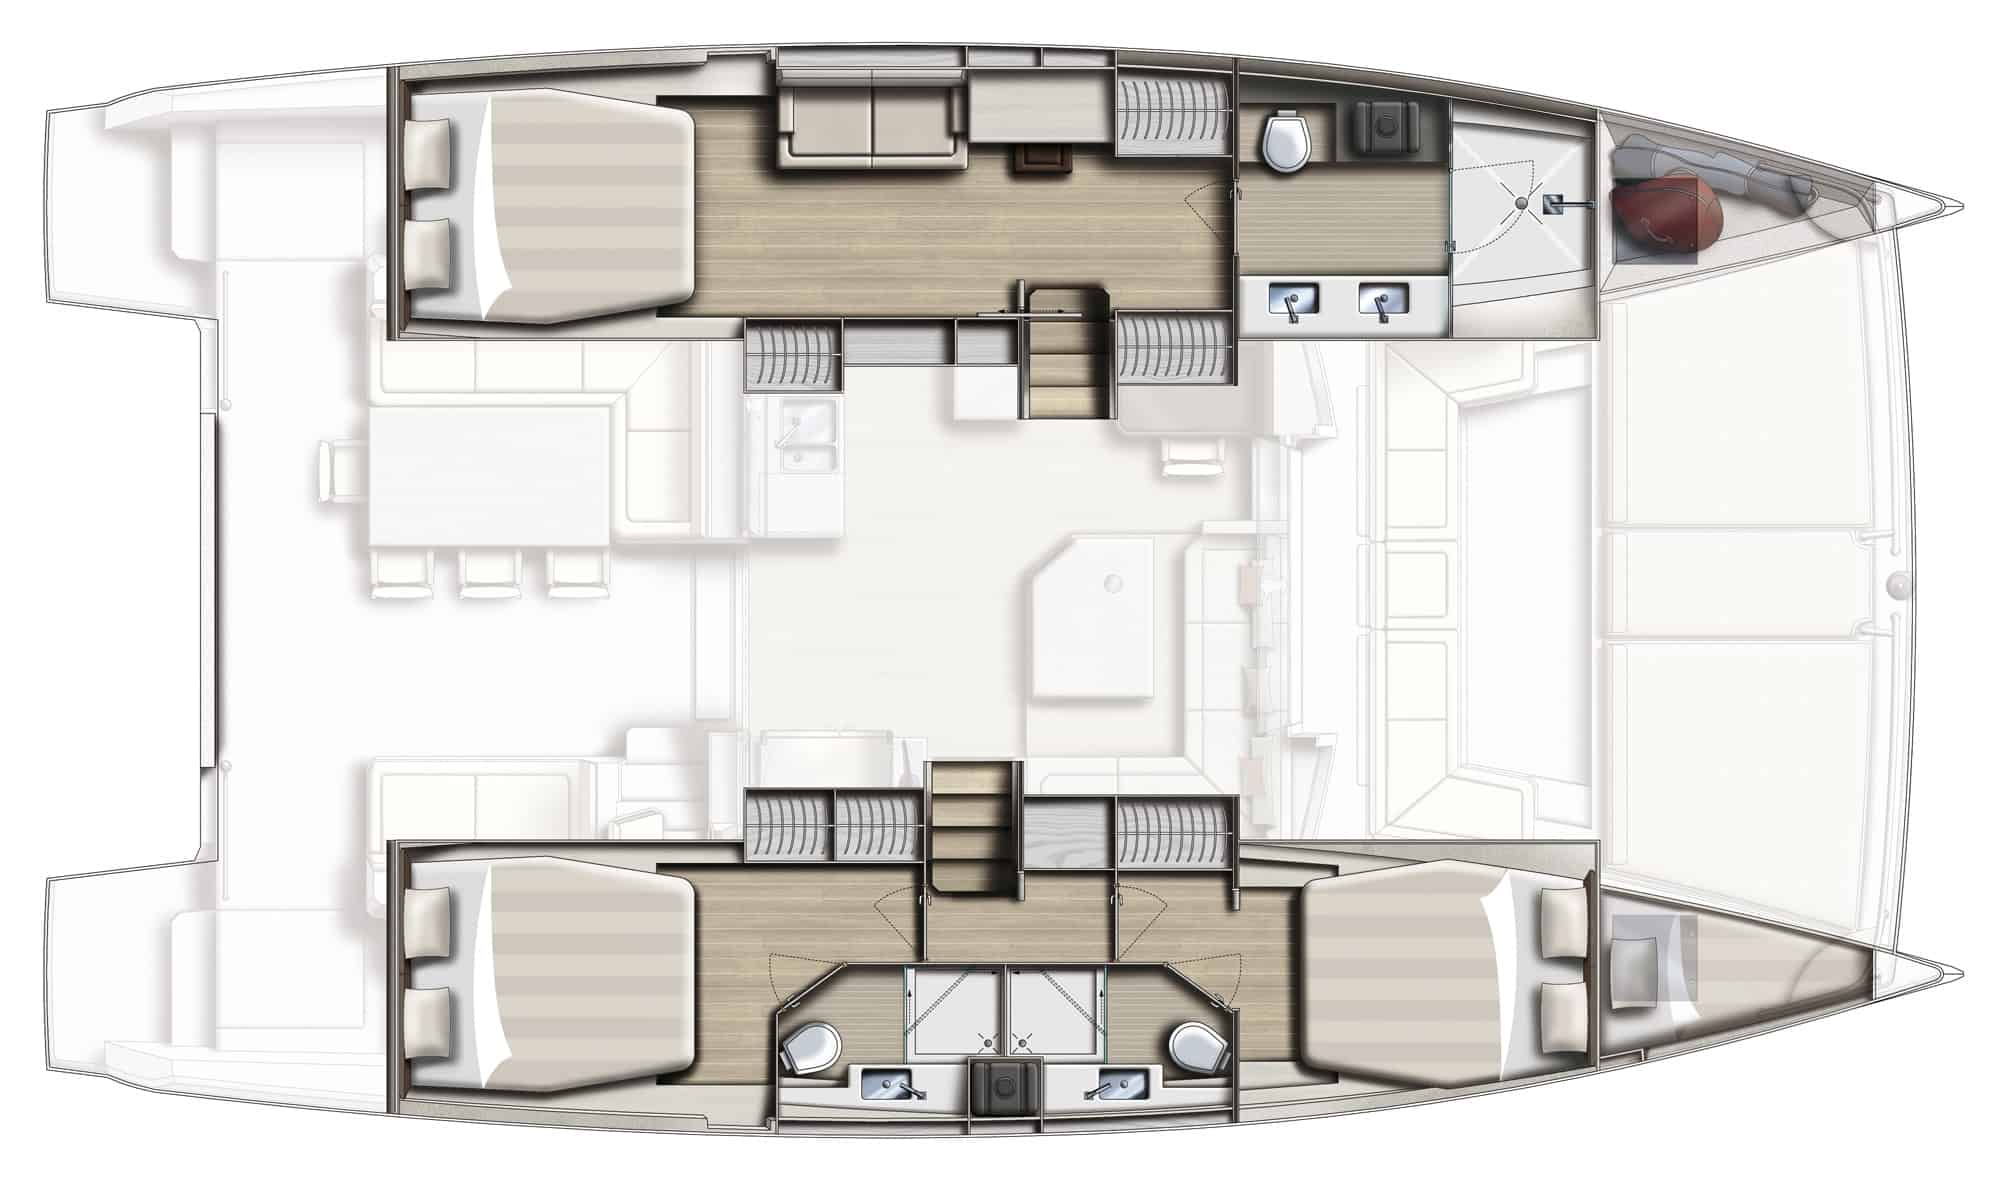 bali 4.5 with 3 cabin configuration